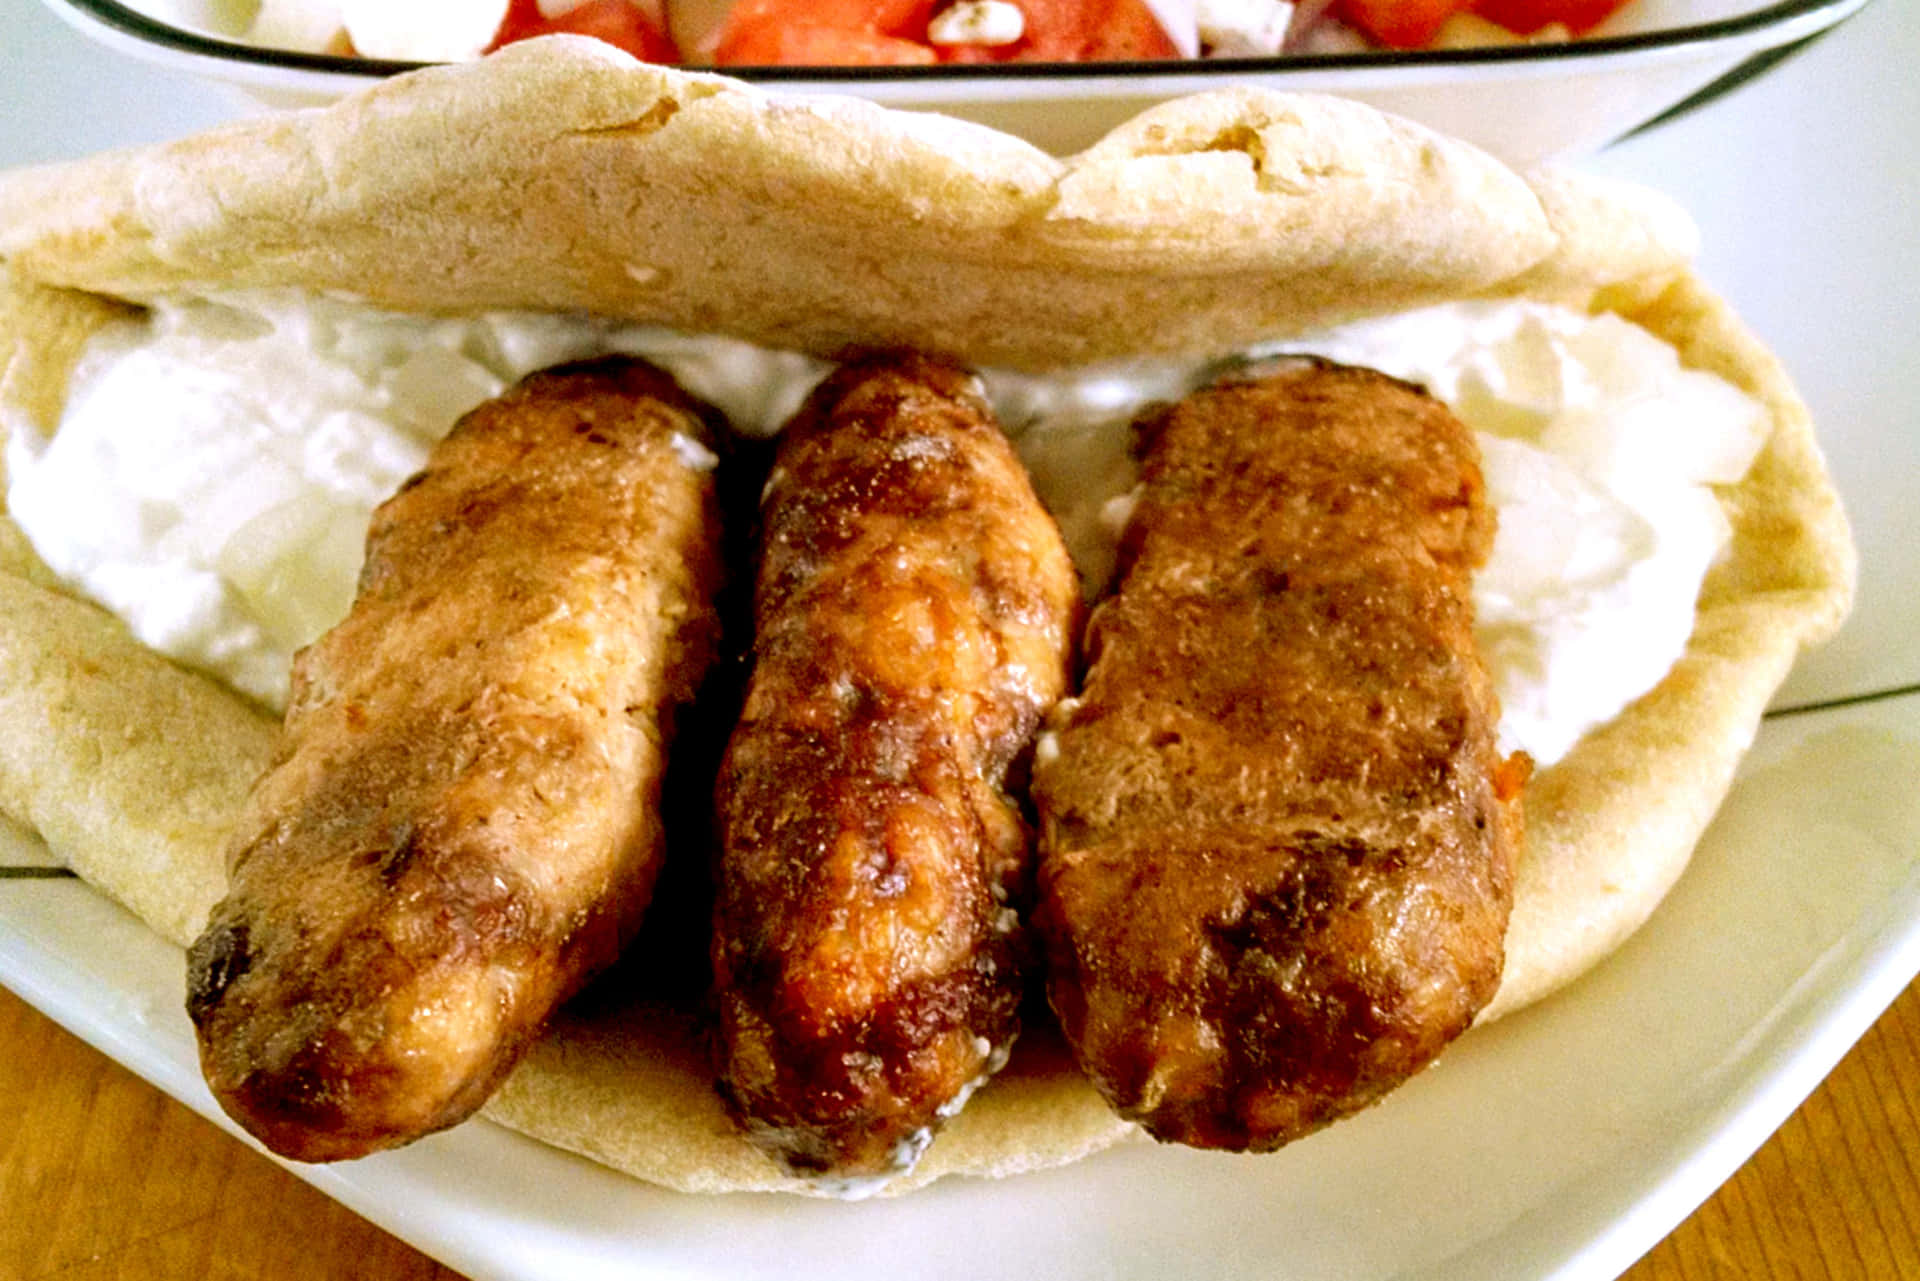 Ćevapipita Sandwich Is A Traditional Bosnian Dish Consisting Of Grilled Minced Meat Served In A Pita Bread With Various Condiments And Toppings. Wallpaper